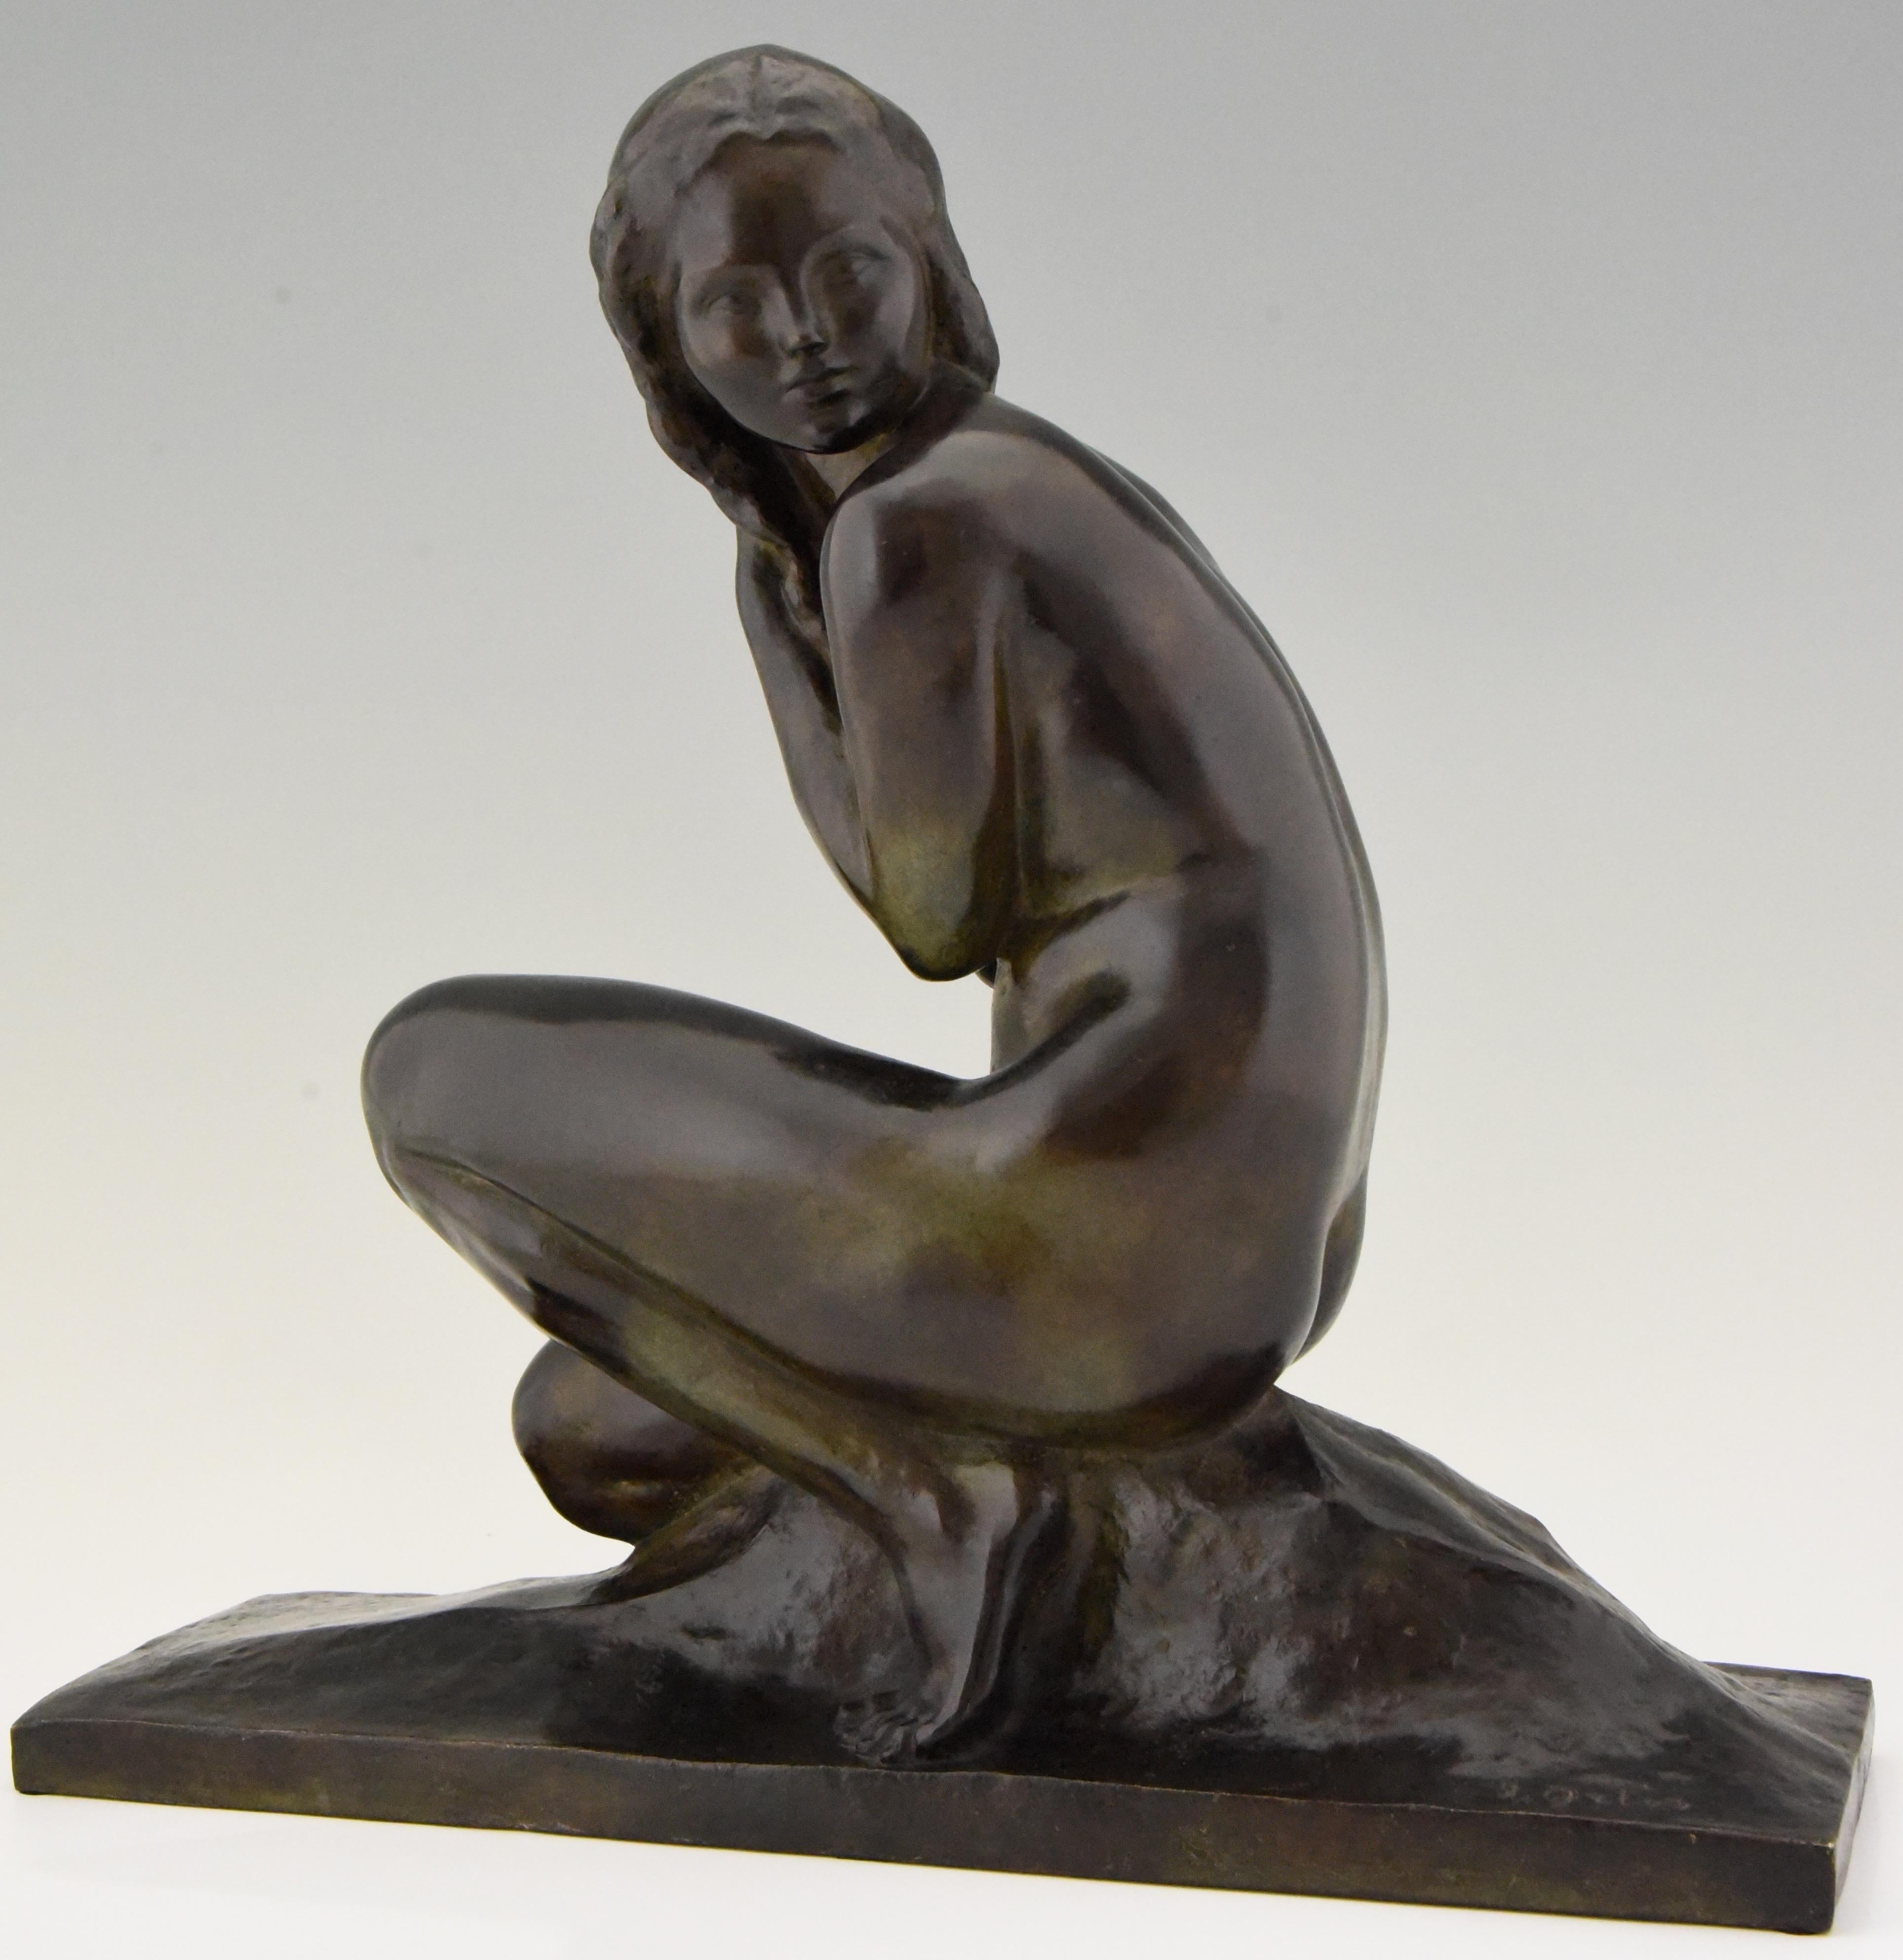 Beautiful Art Deco bronze sculpture of a kneeling nude with a lovely patina. Signed by the French artist Ortis and with the founders' signature Susse Freres. Marked Cire perdue (lost wax technique) Stamped number,
circa 1930
Literature:
“Art Deco